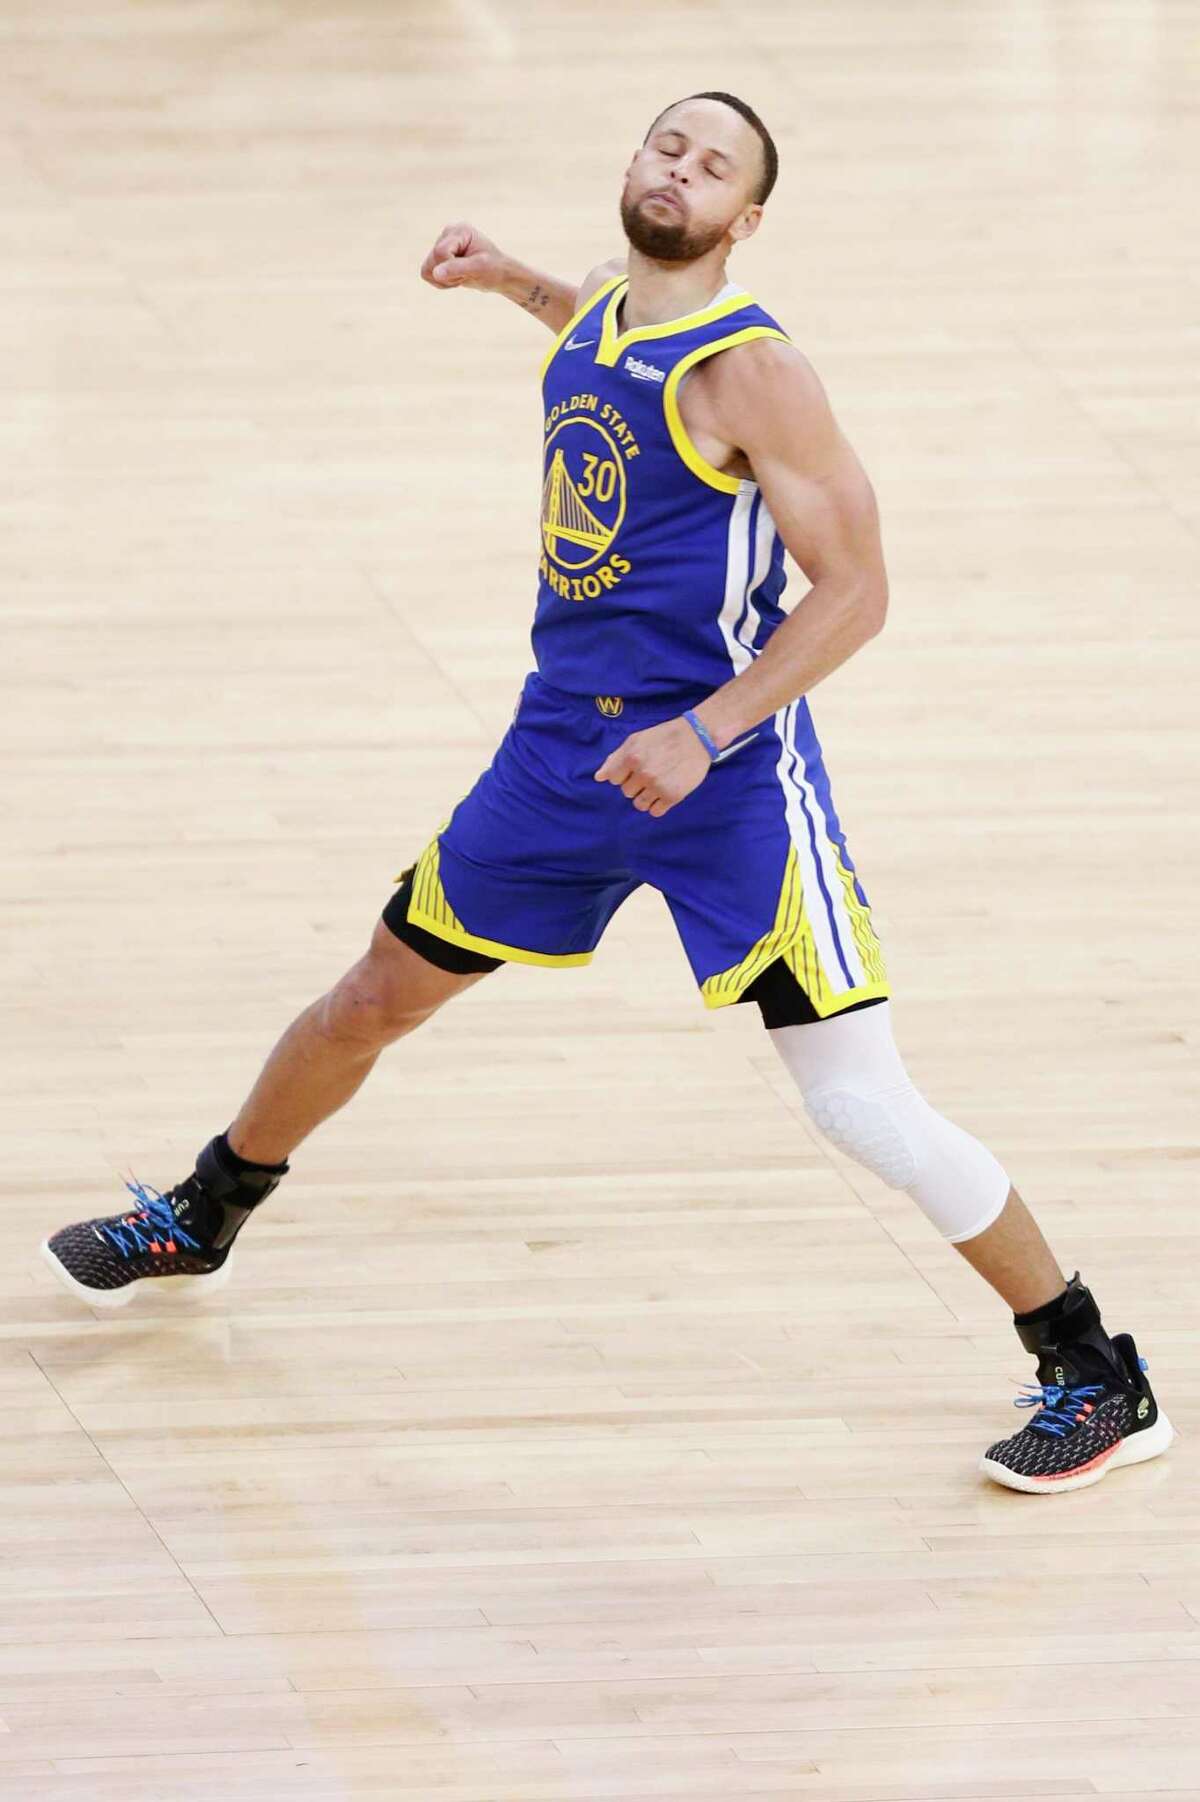 Golden State Warriors guard Stephen Curry (30) celebrates his three-point shot late in the fourth quarter against the Memphis Grizzlies in Game 6 of the Western Conference Semifinals at Chase Center, Friday, May 13, 2022, in San Francisco, Calif. The Warriors won 110-96 in the game and 4-2 in the series to advance to the conference finals.